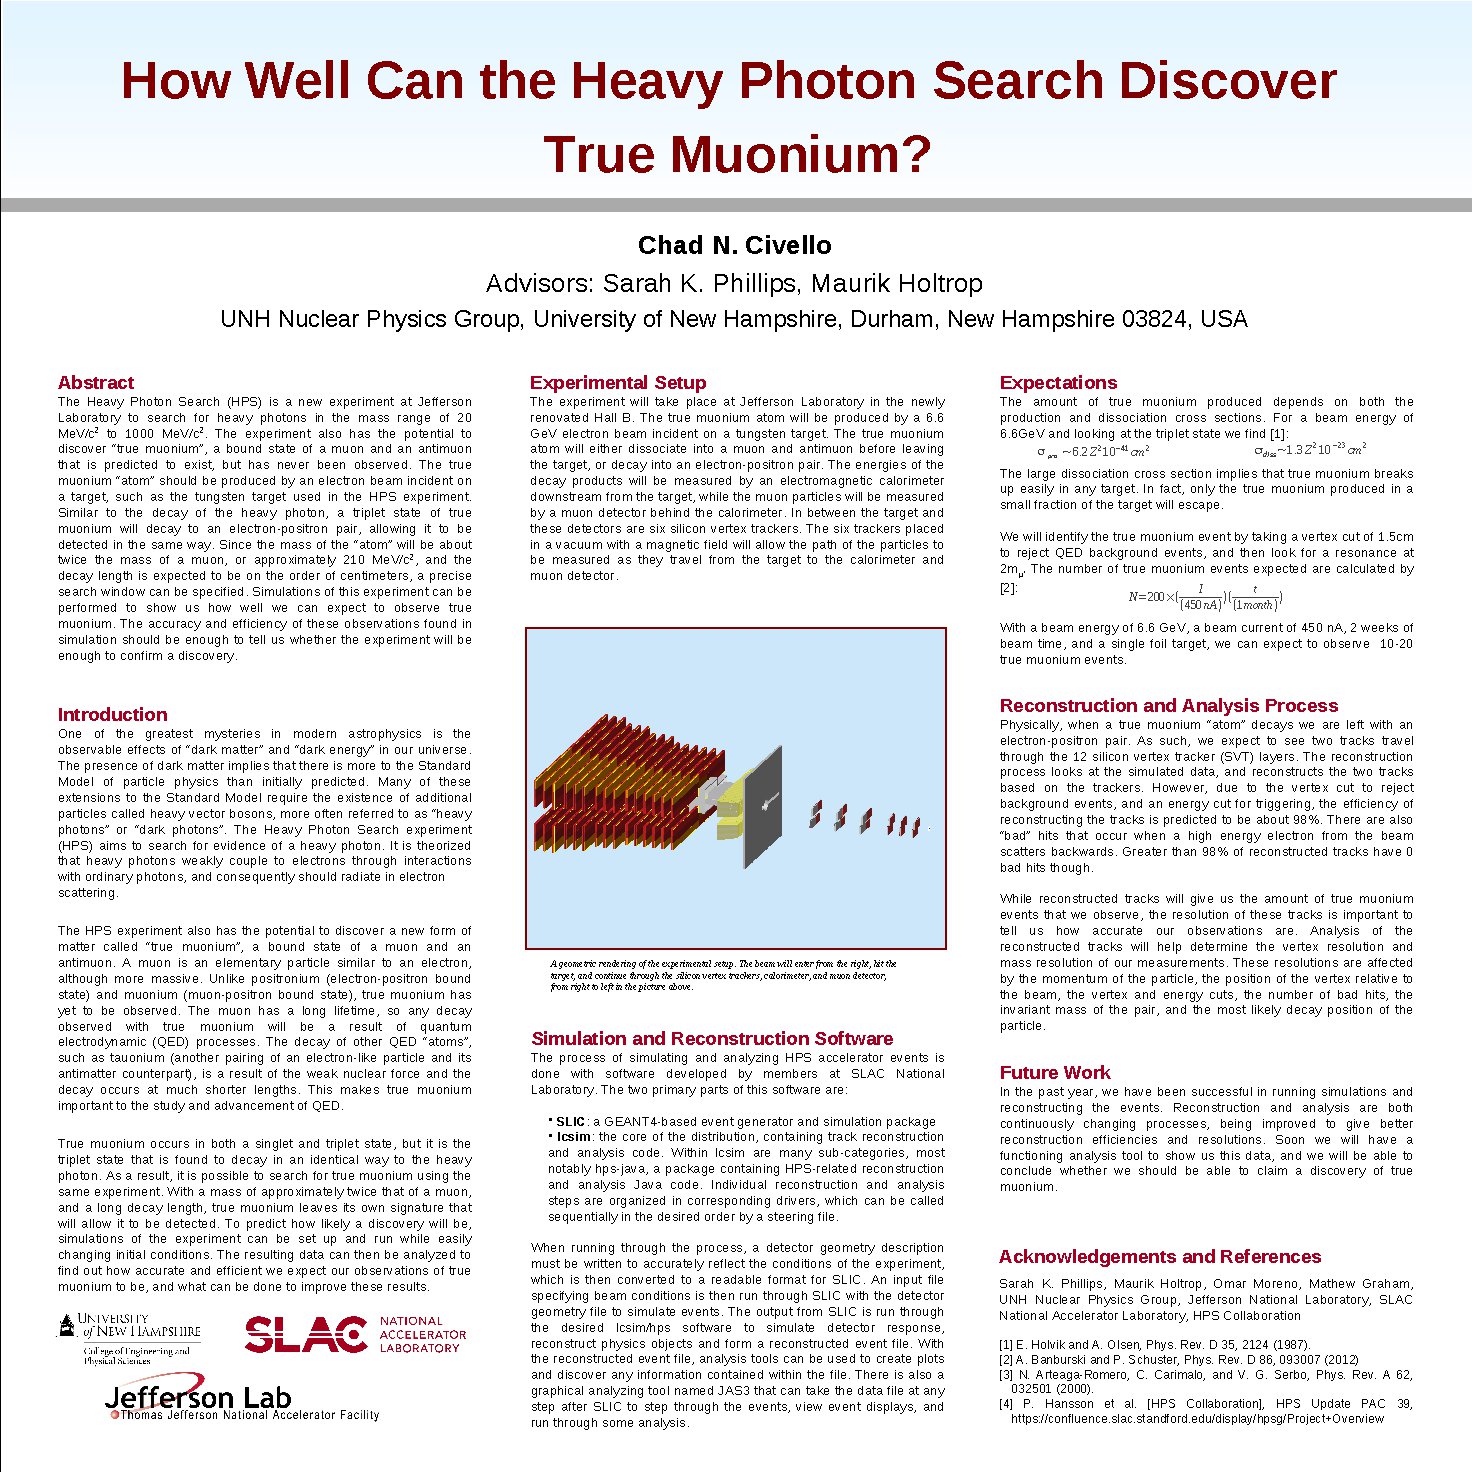 How Well Can The Heavy Photon Search Discover True Muonium? by cng8